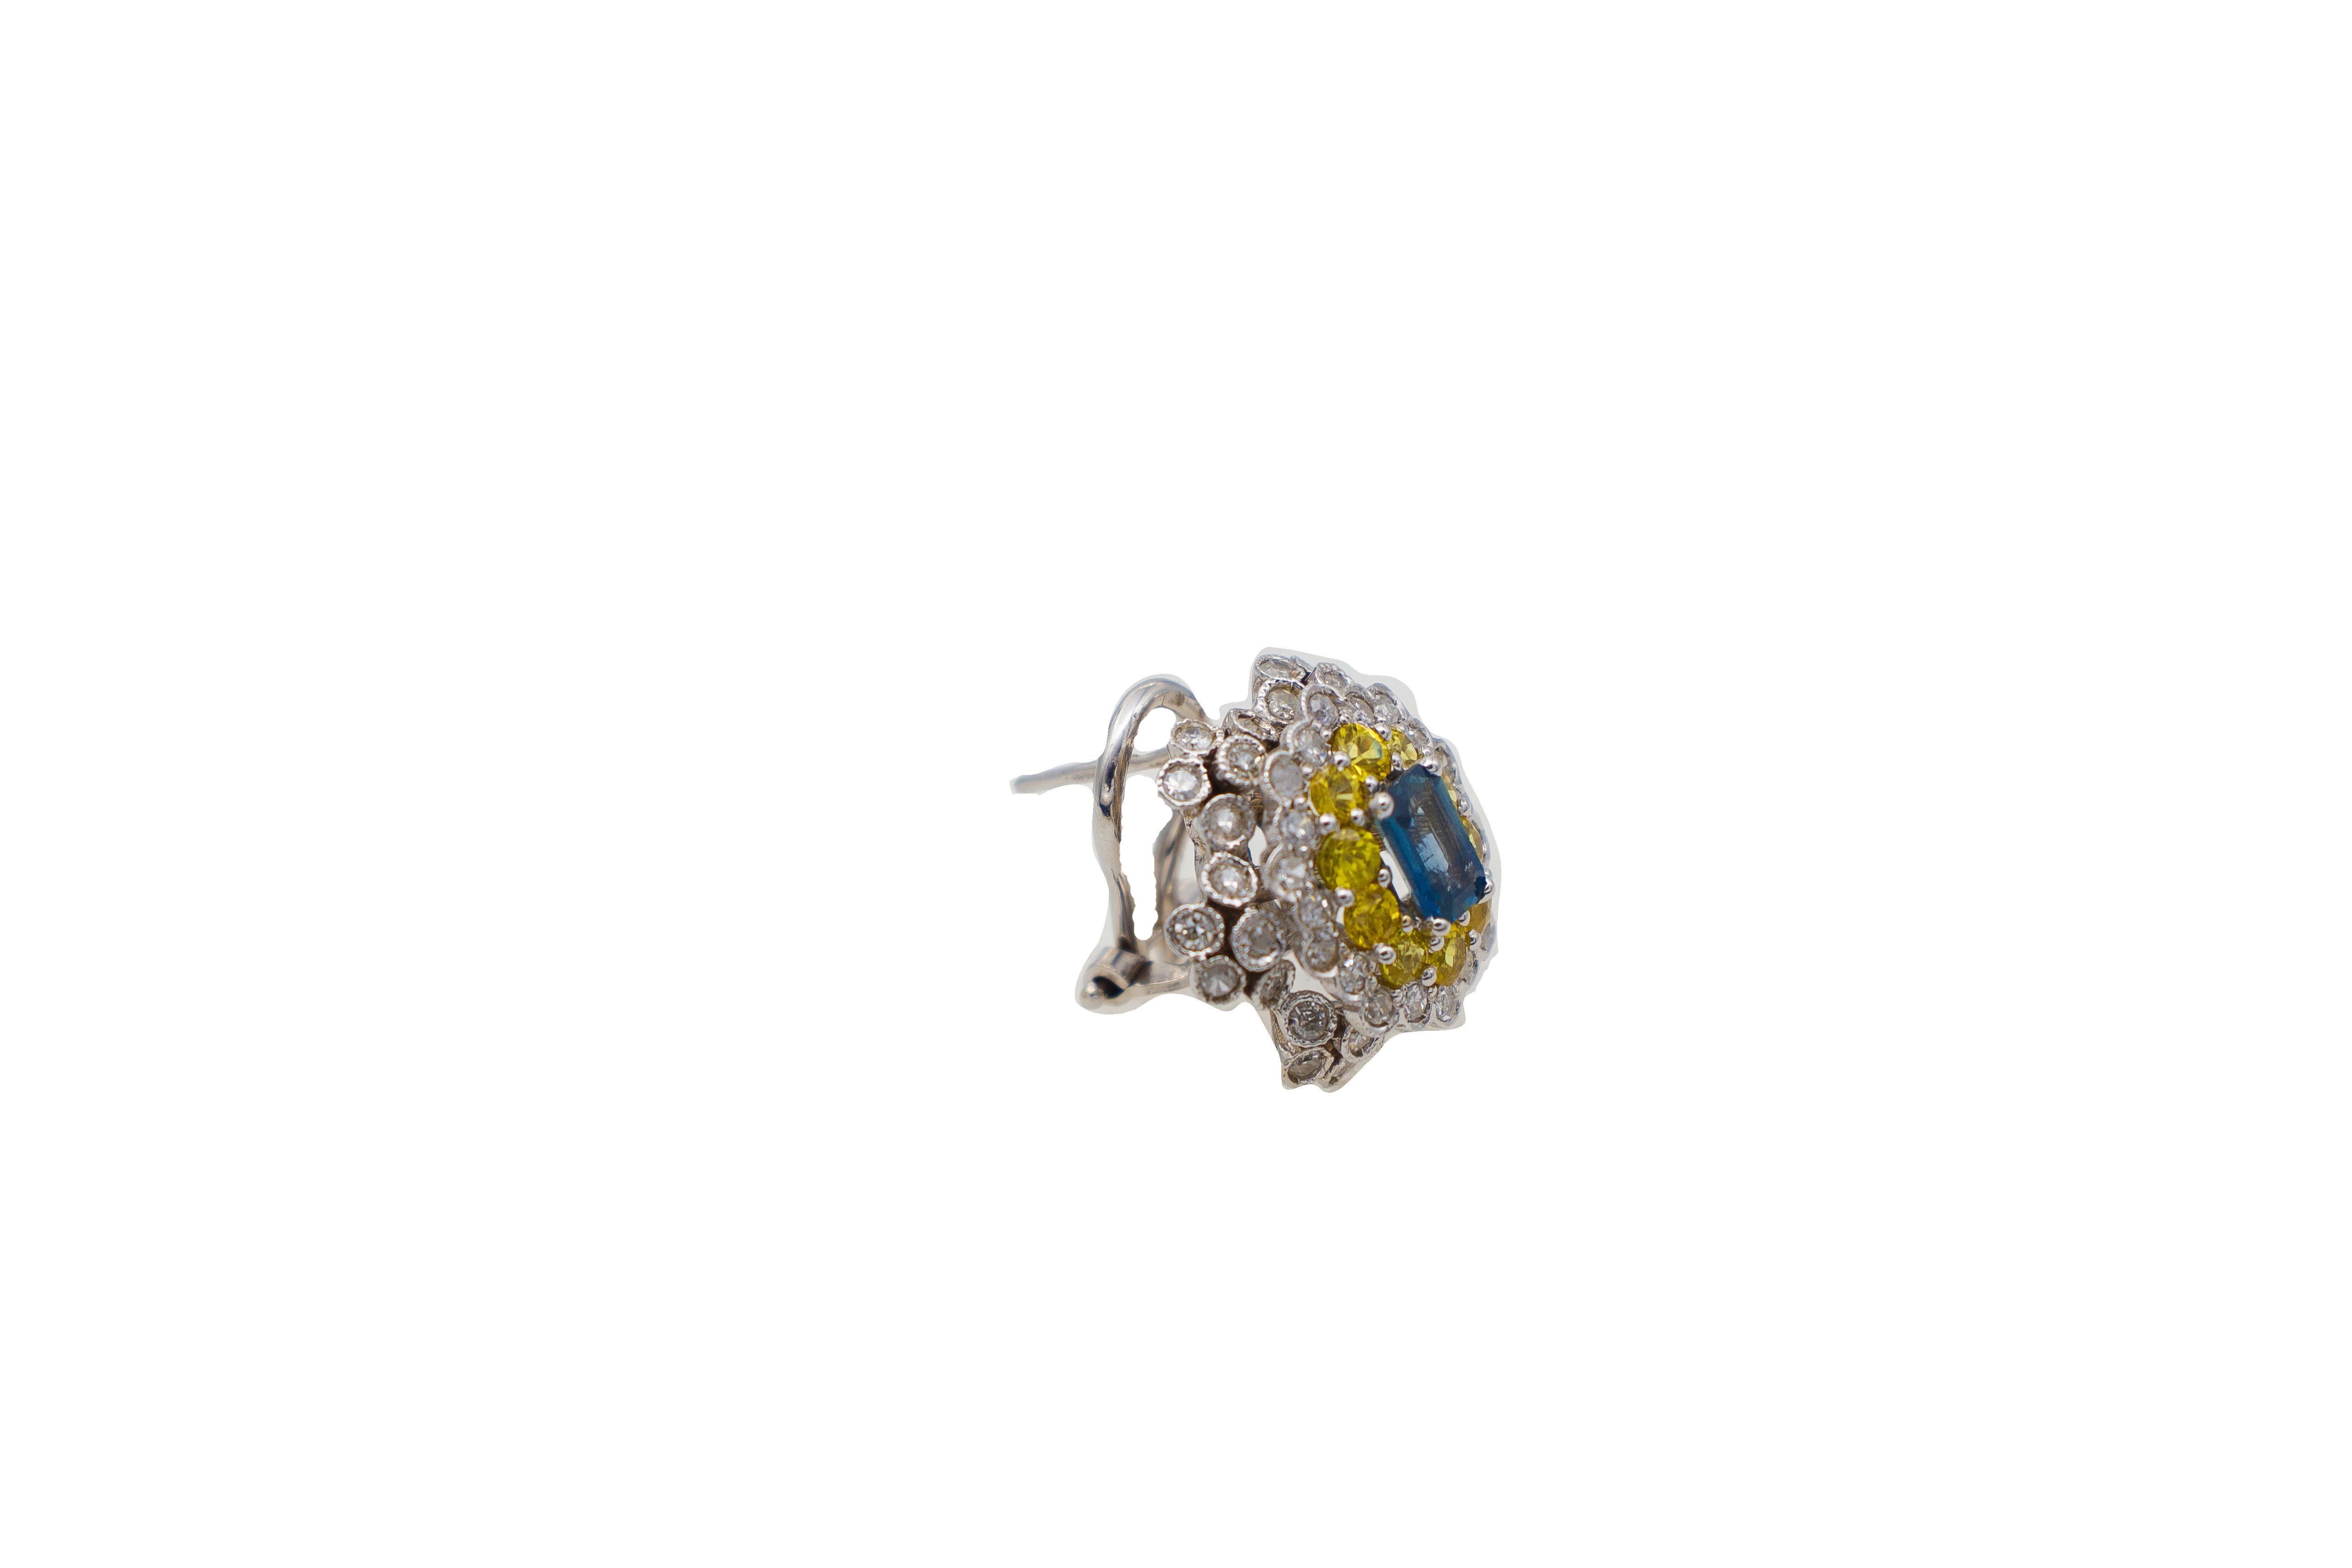 Retro Diamonds, Yellow and Blue Sapphires, White Gold Clip-On Earrings